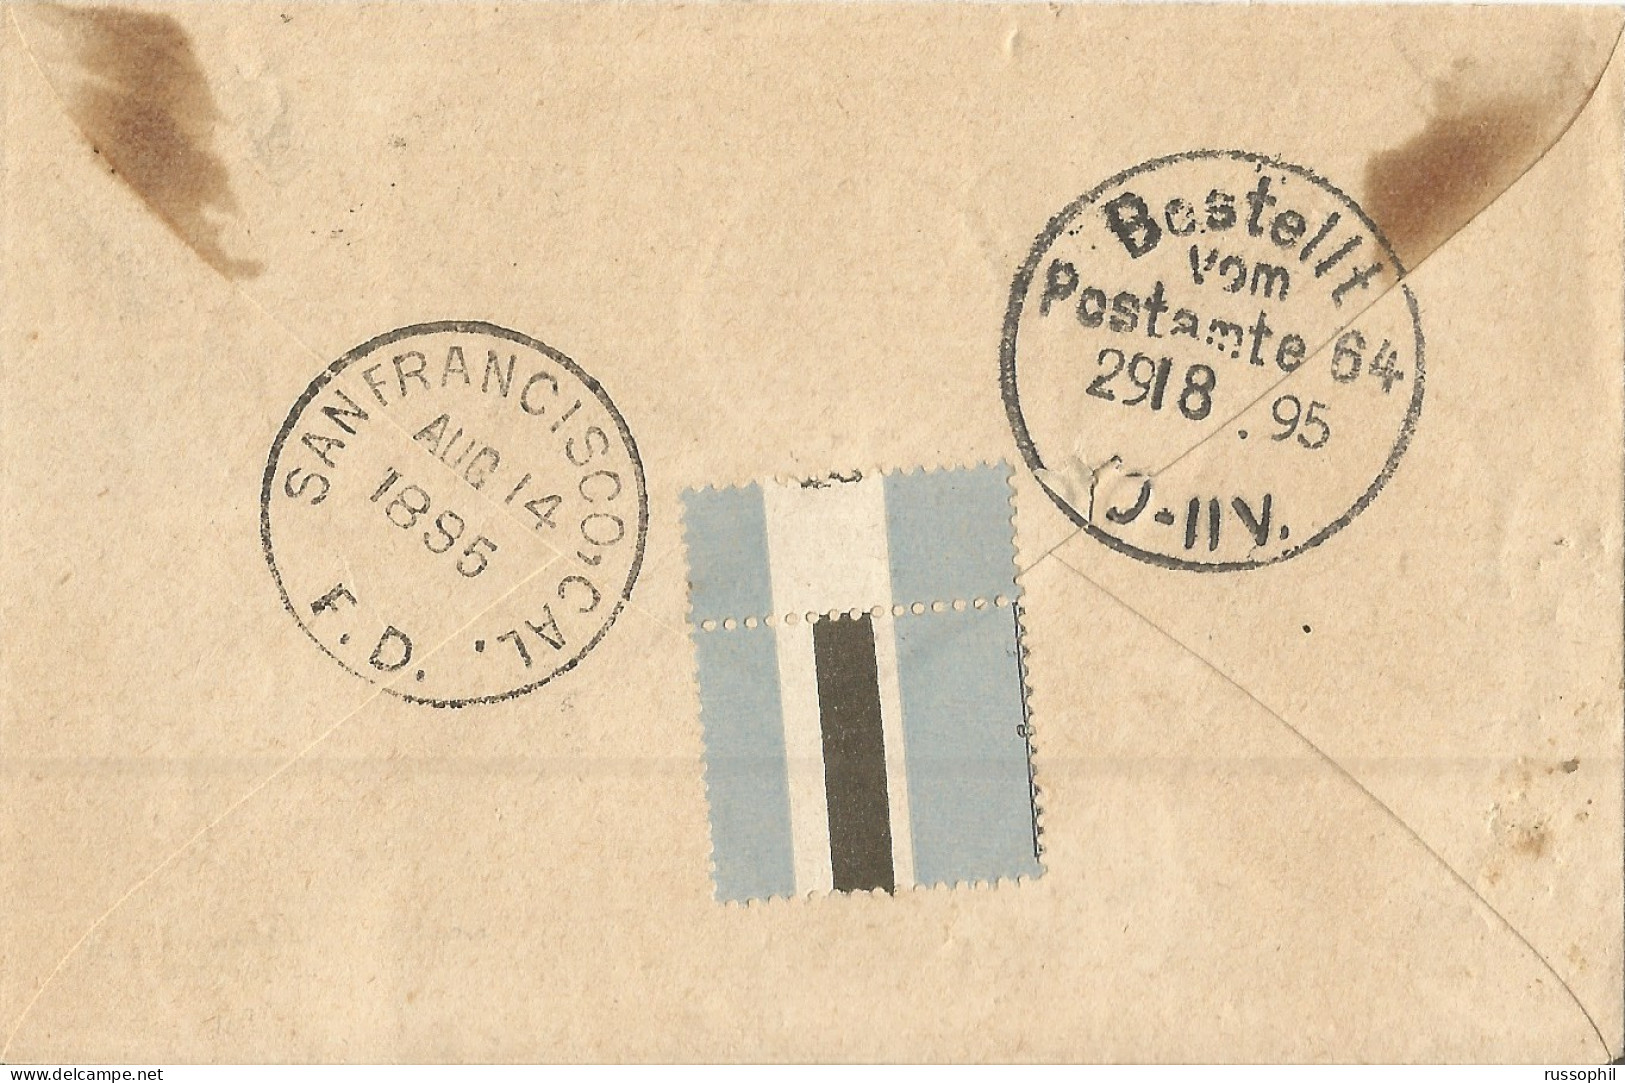 OCEANIE -  5 STAMP 20 CENT. UPRATED 5 CENT. POSTAL STATIONERY COVER FROM PAPEETE TO GERMANY - 1895 - Briefe U. Dokumente